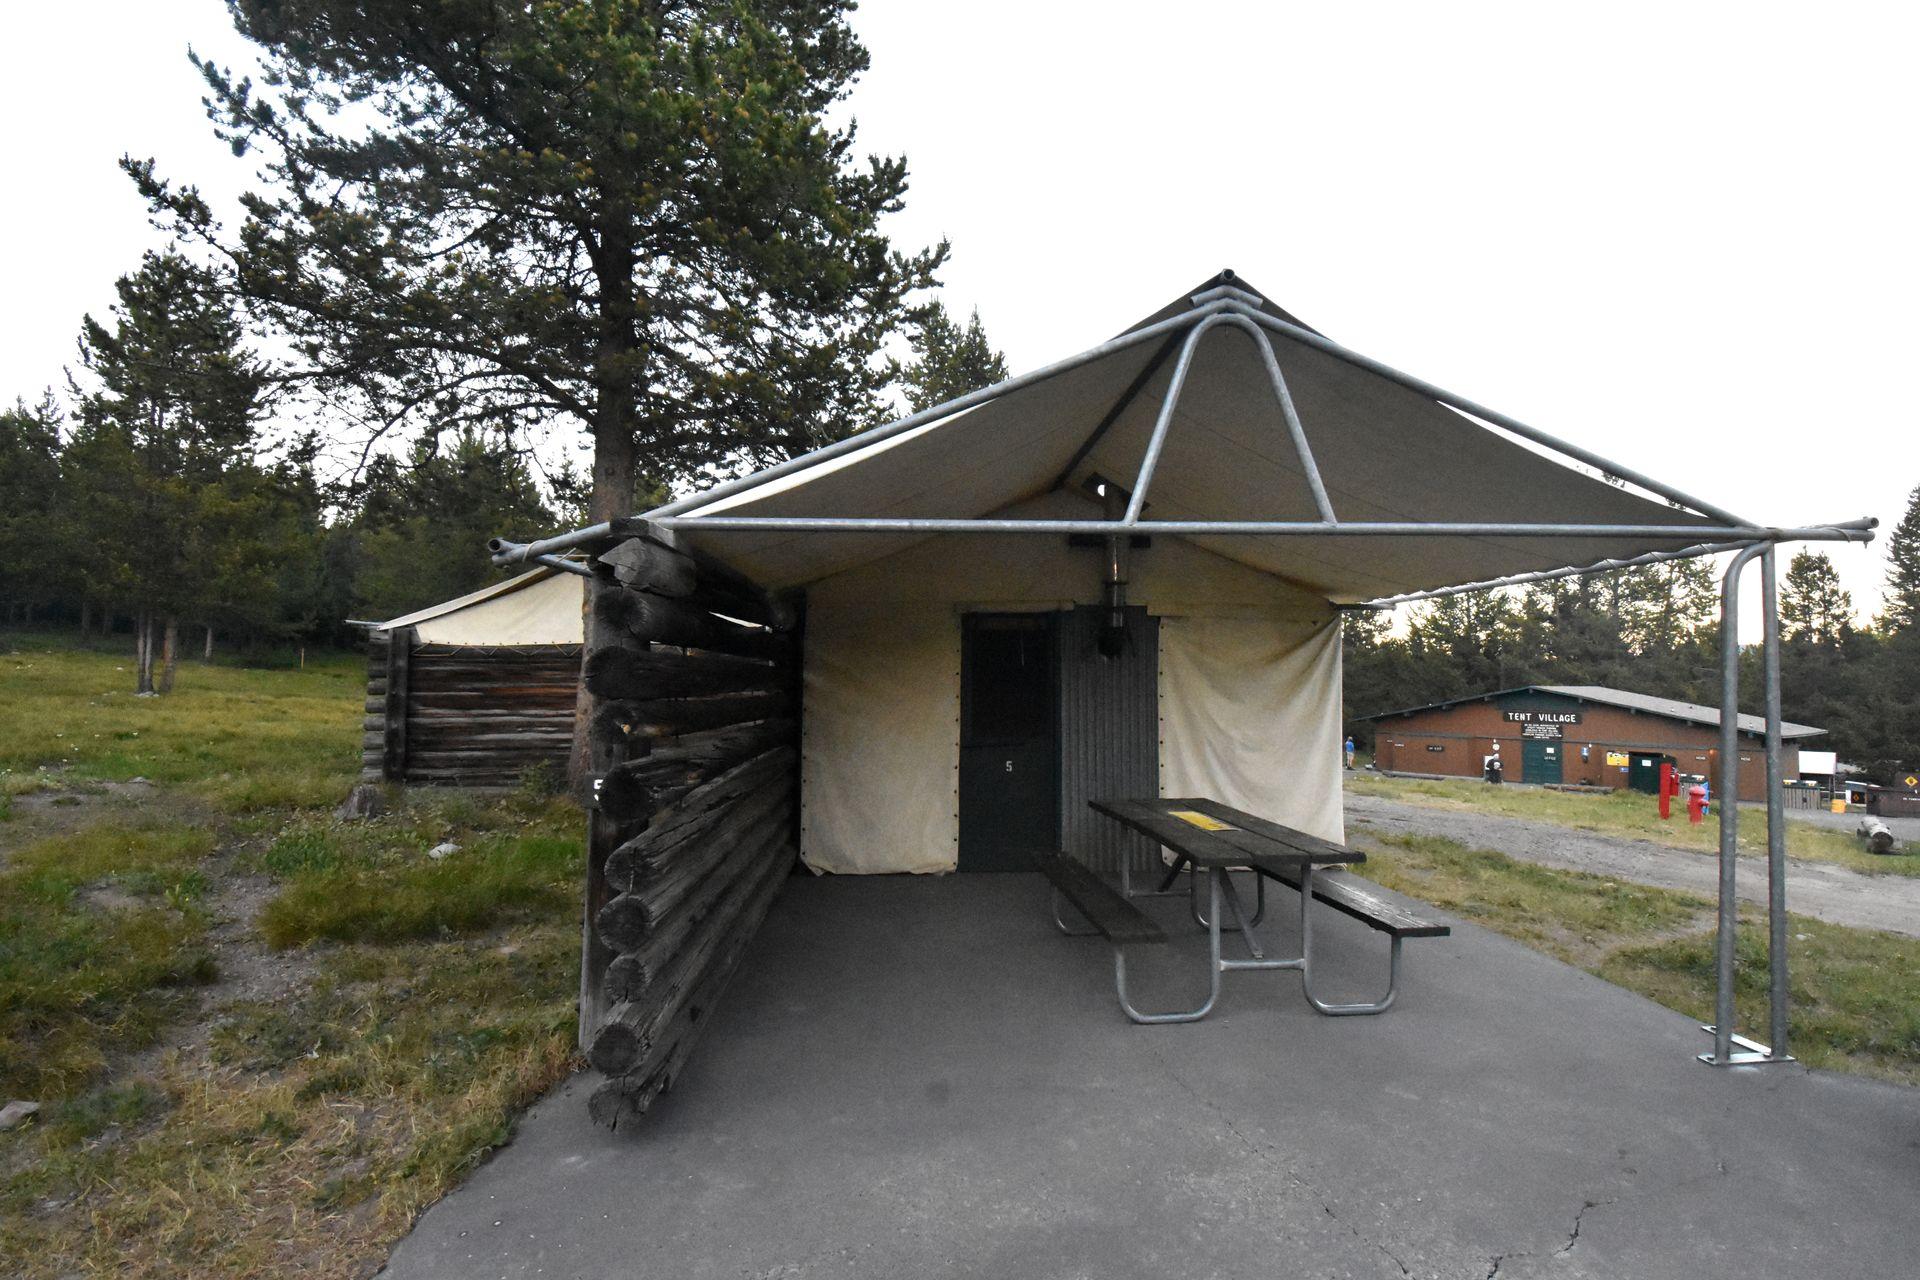 A safari tent at Colter Bay Tent Village. There is an overhang providing shelter in front of the tent and a picnic table.